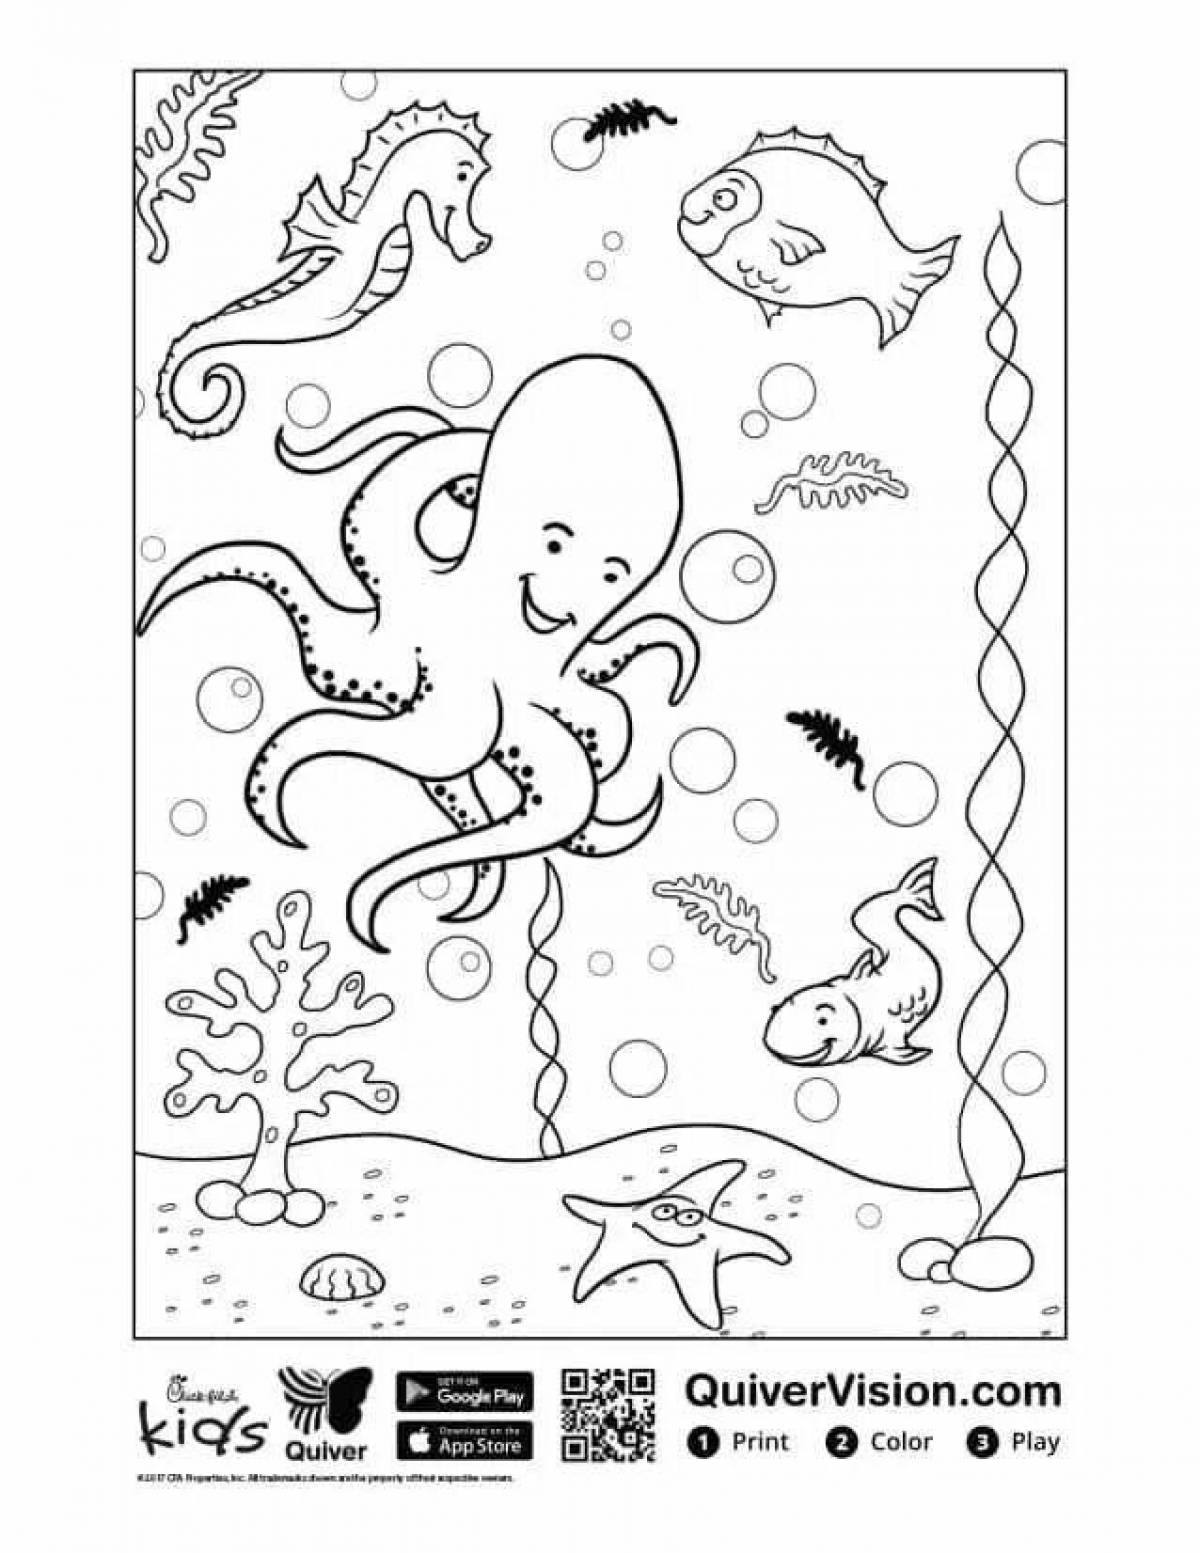 Charming quiver coloring page